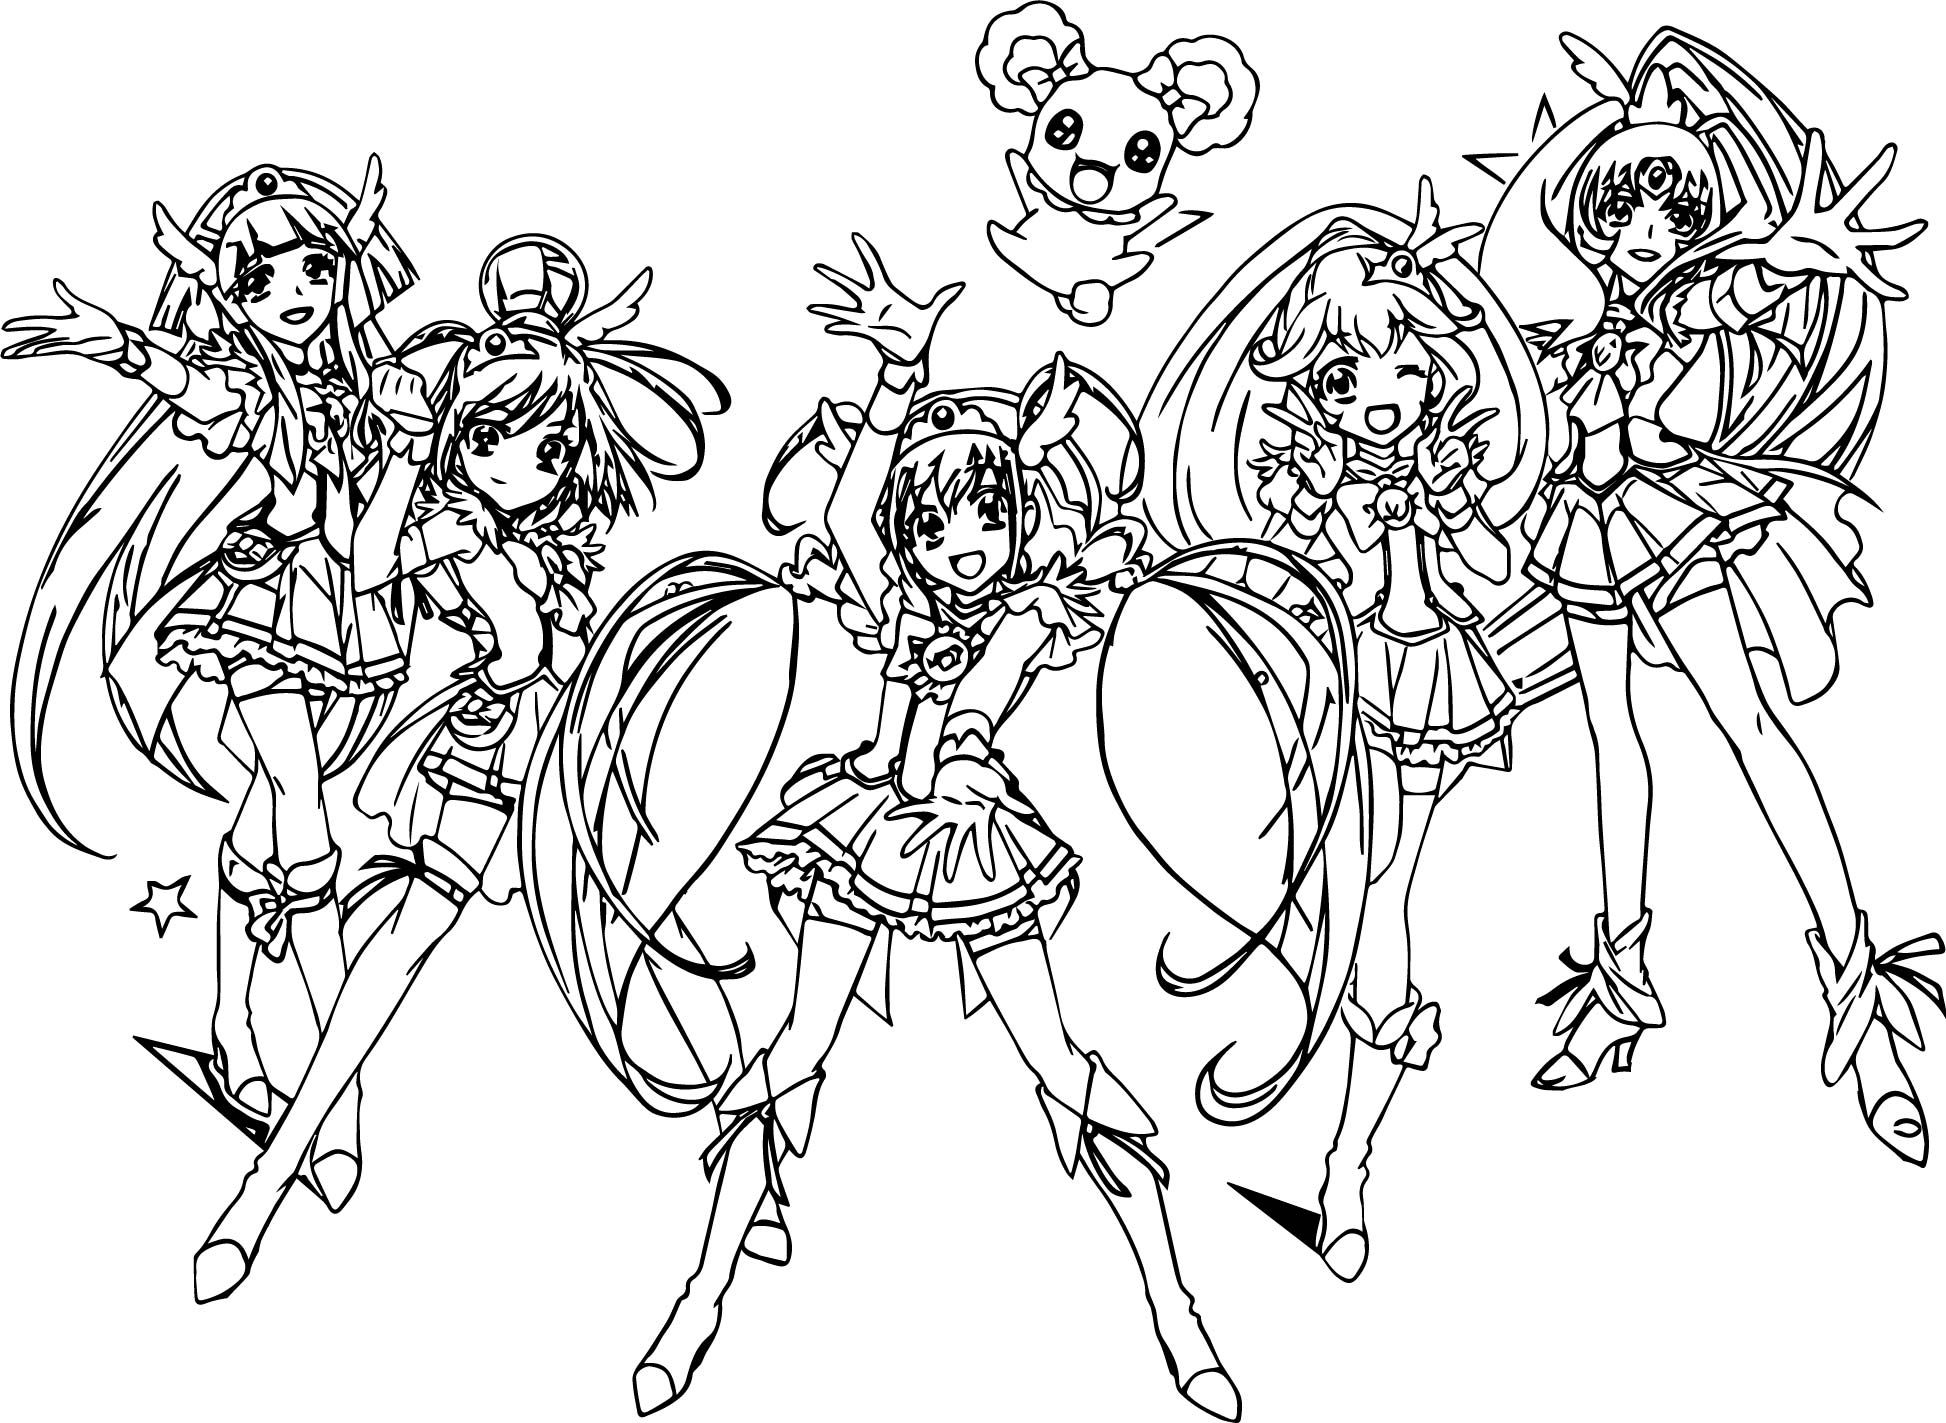 Glitter-Force-All-Group-Team-Coloring-Page | Glitter force ...